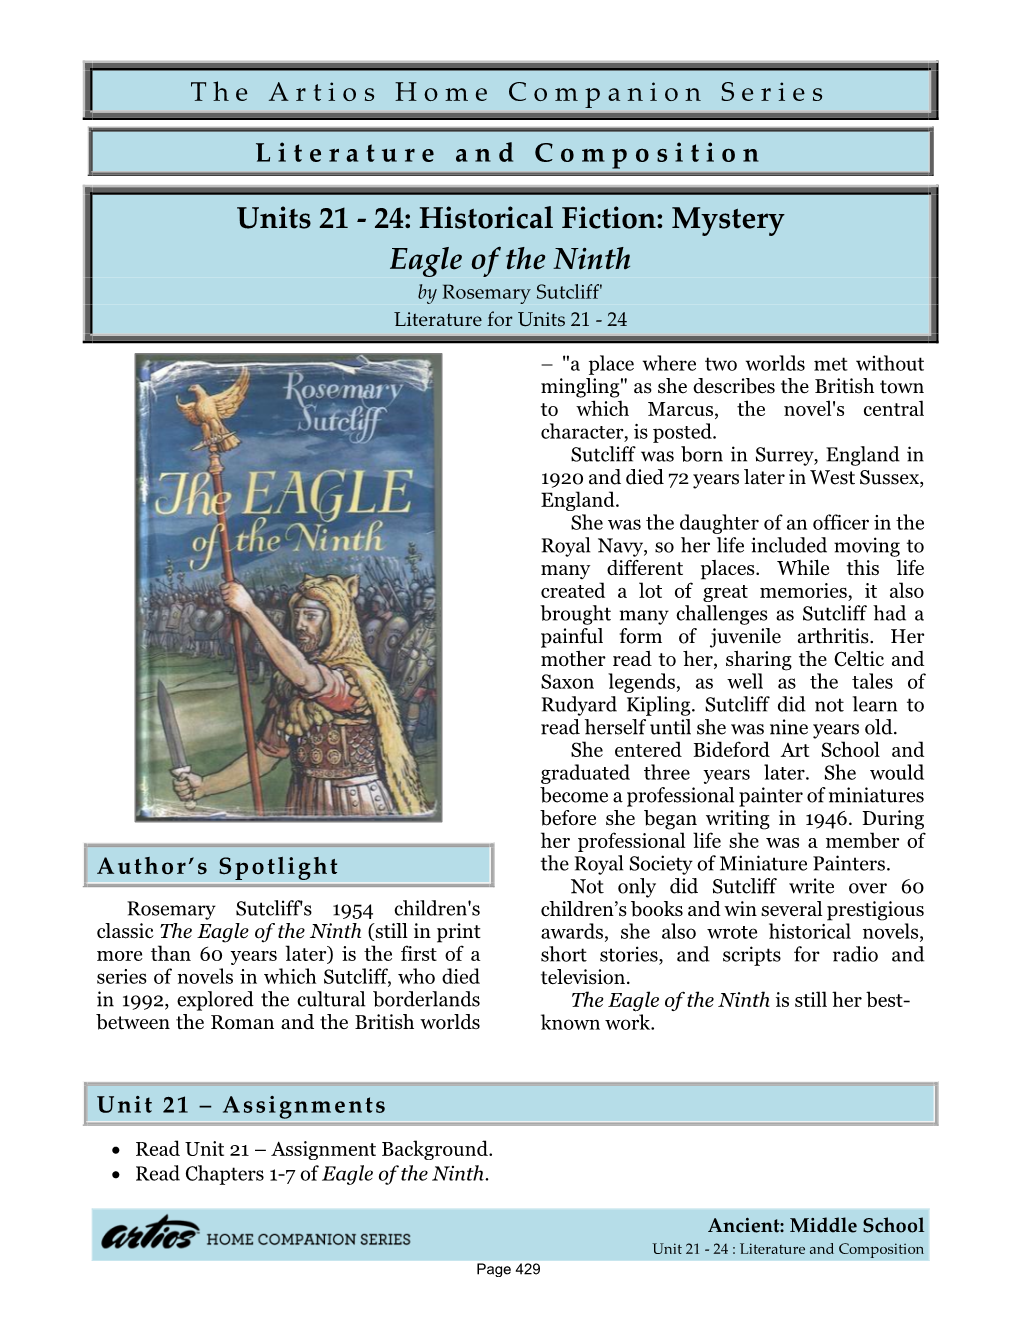 Units 21 - 24: Historical Fiction: Mystery Eagle of the Ninth by Rosemary Sutcliff' Literature for Units 21 - 24